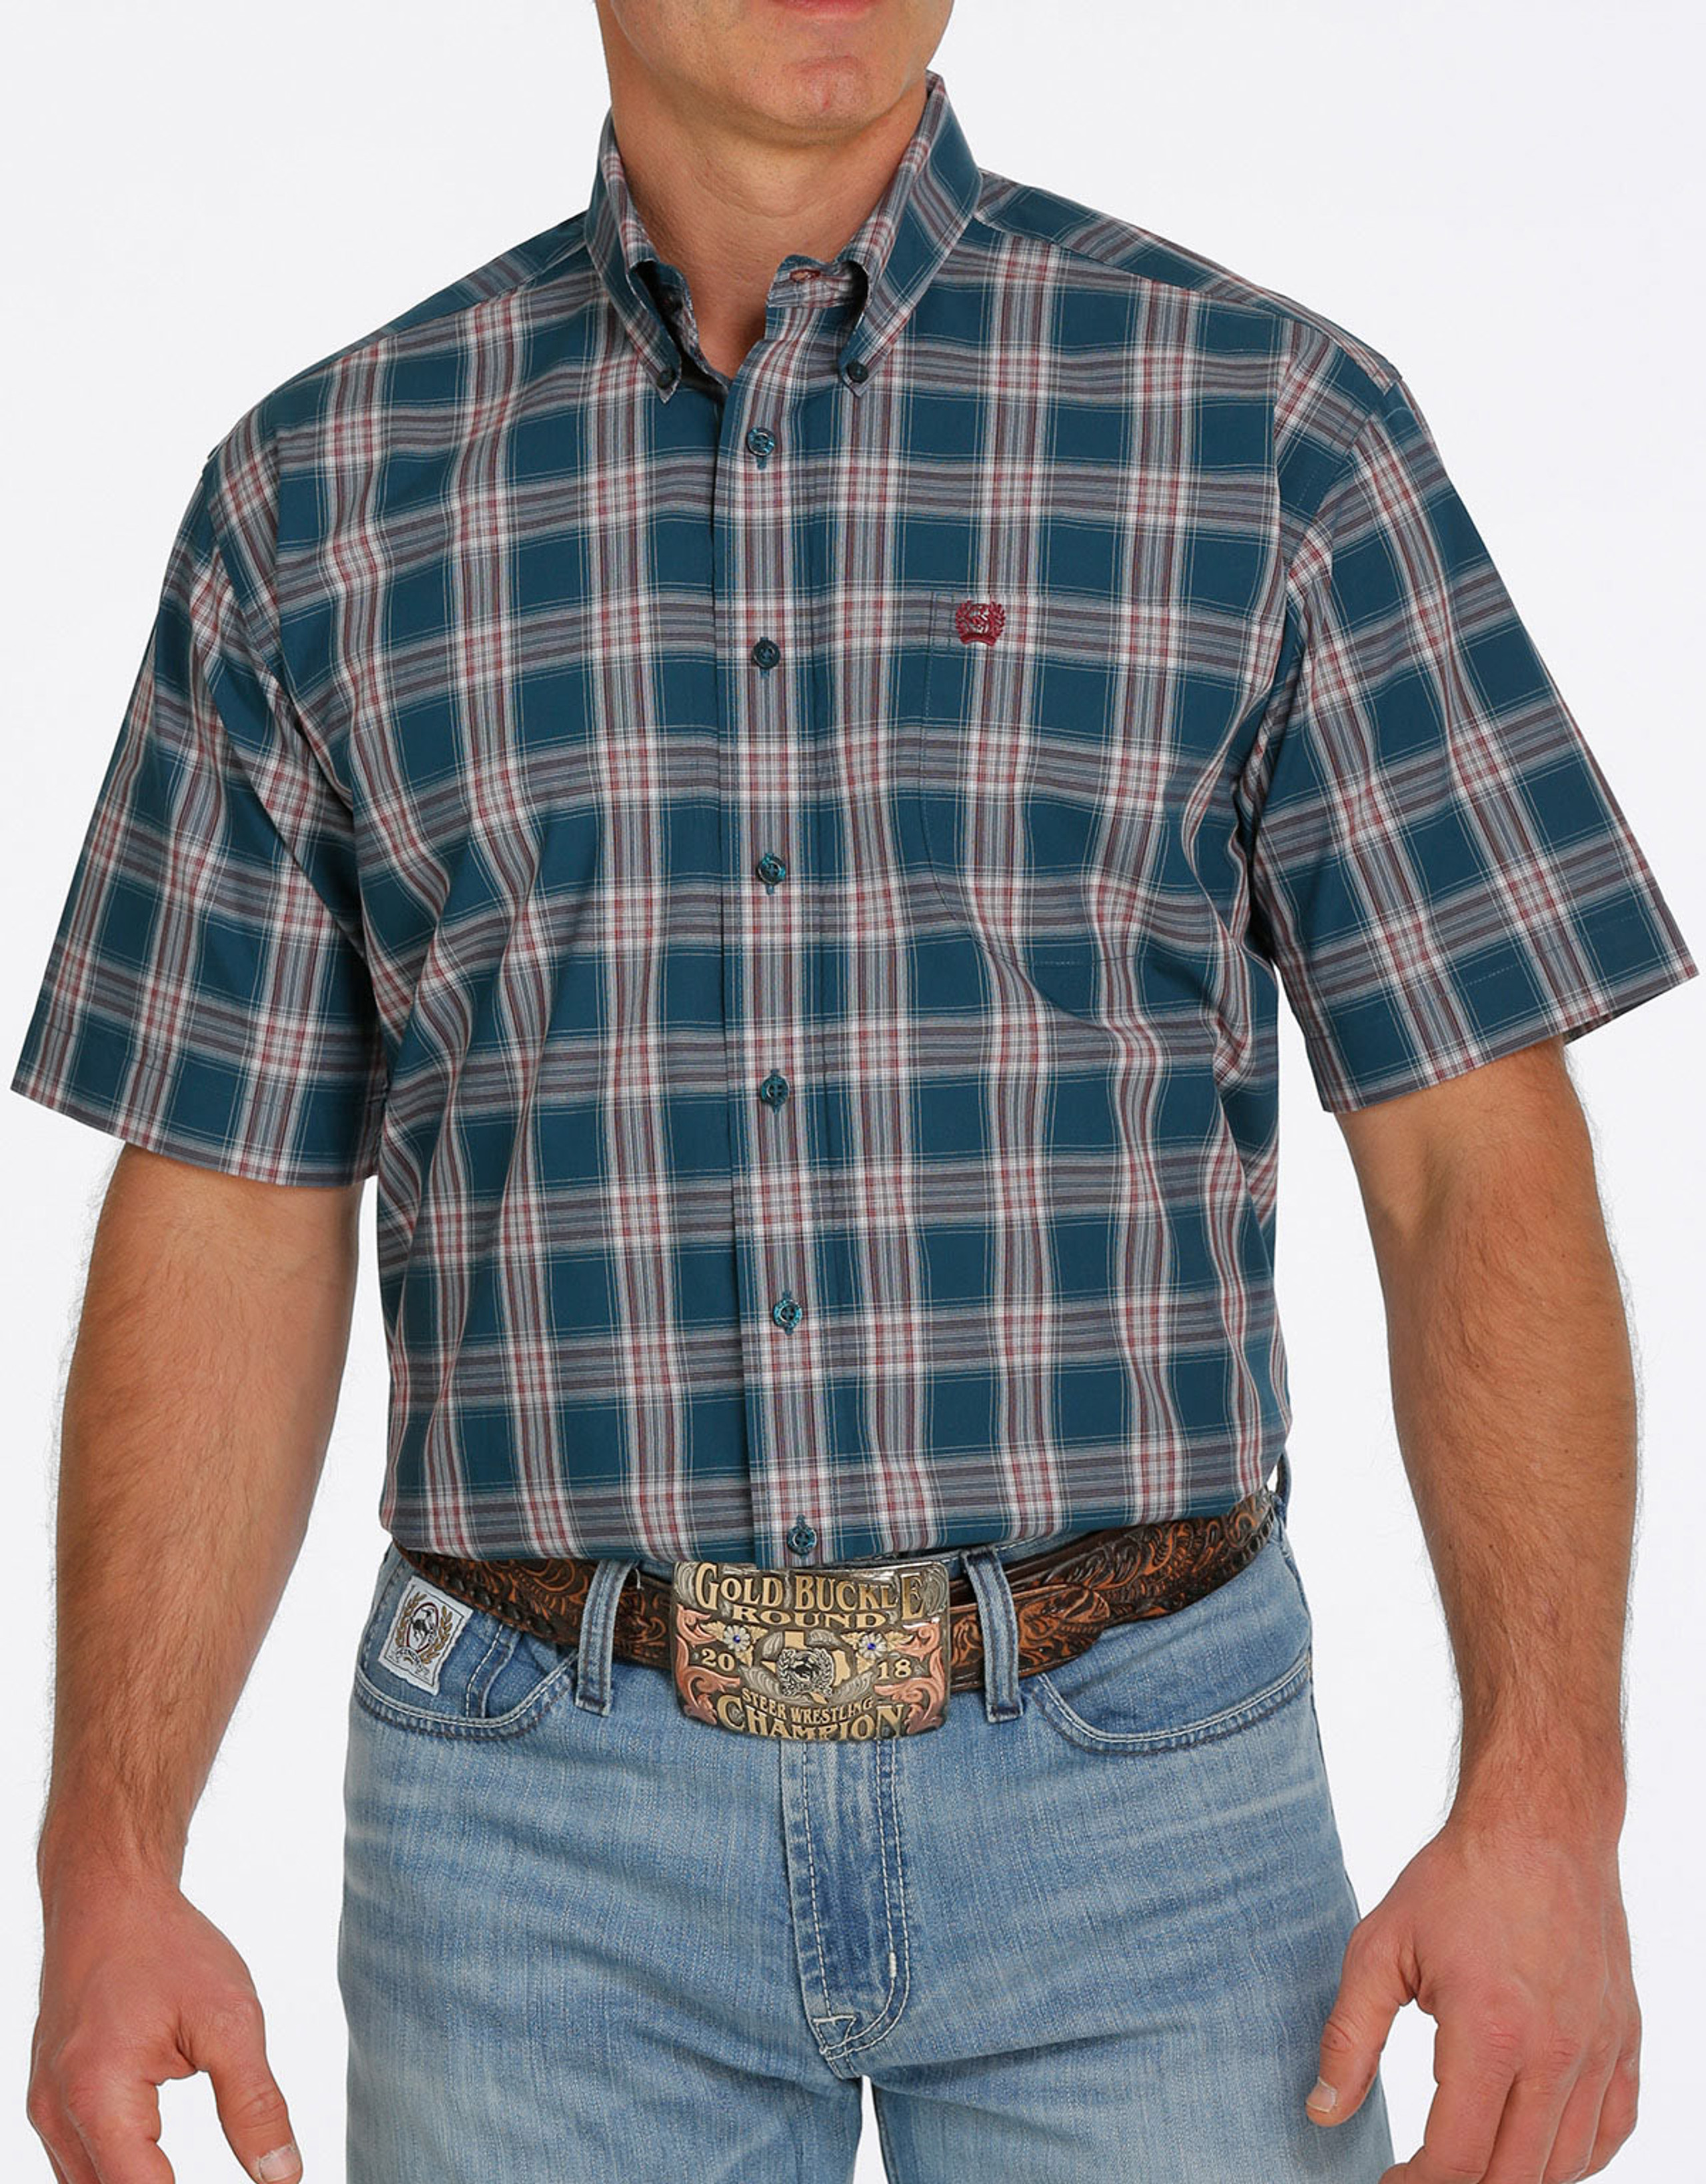 Men's Western Shirts Western Shirts from Langston's